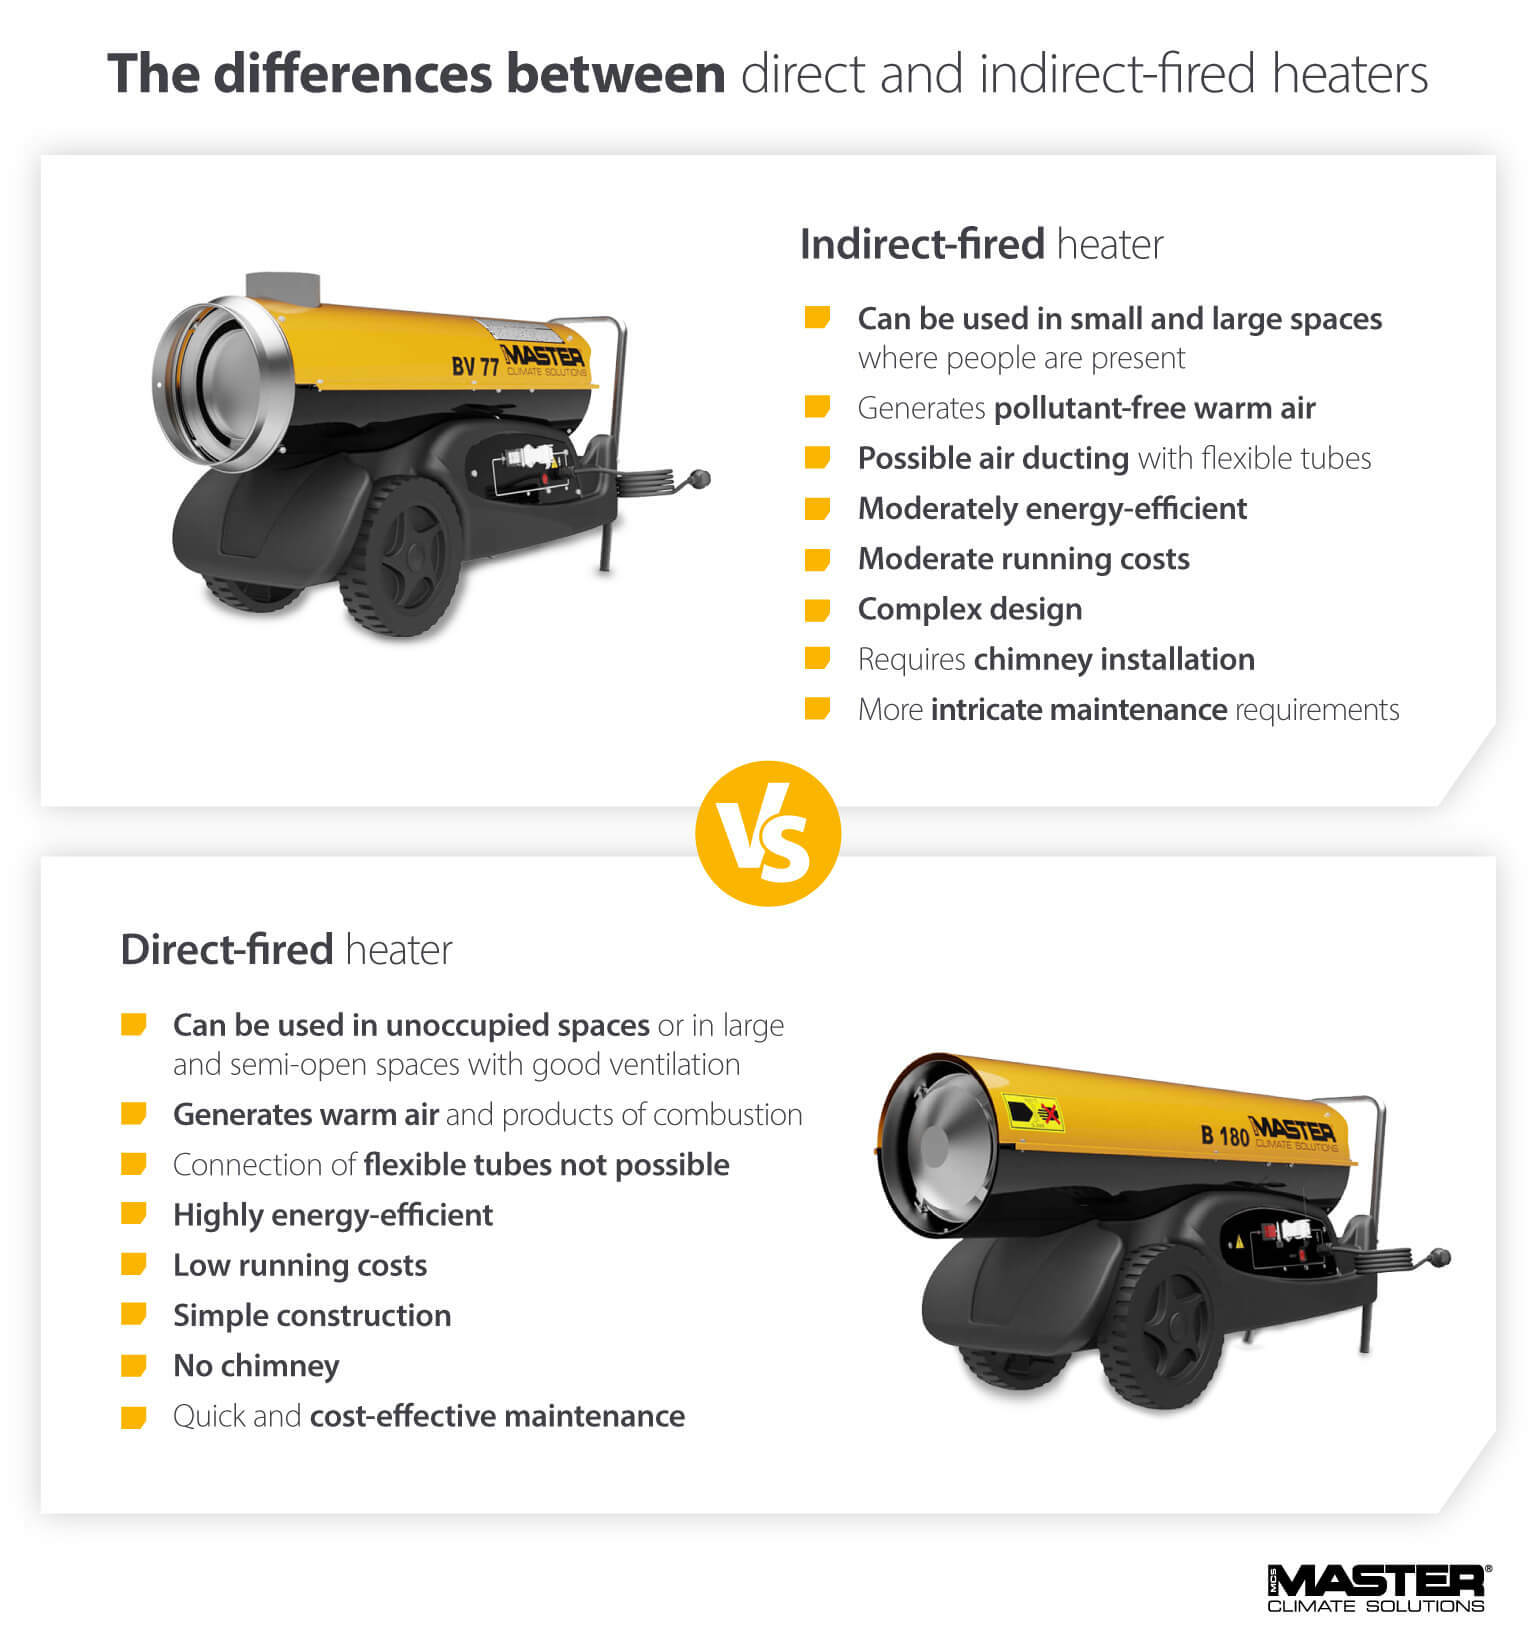 Infographic showing the differences between indirect-fired heaters and direct-fired heaters